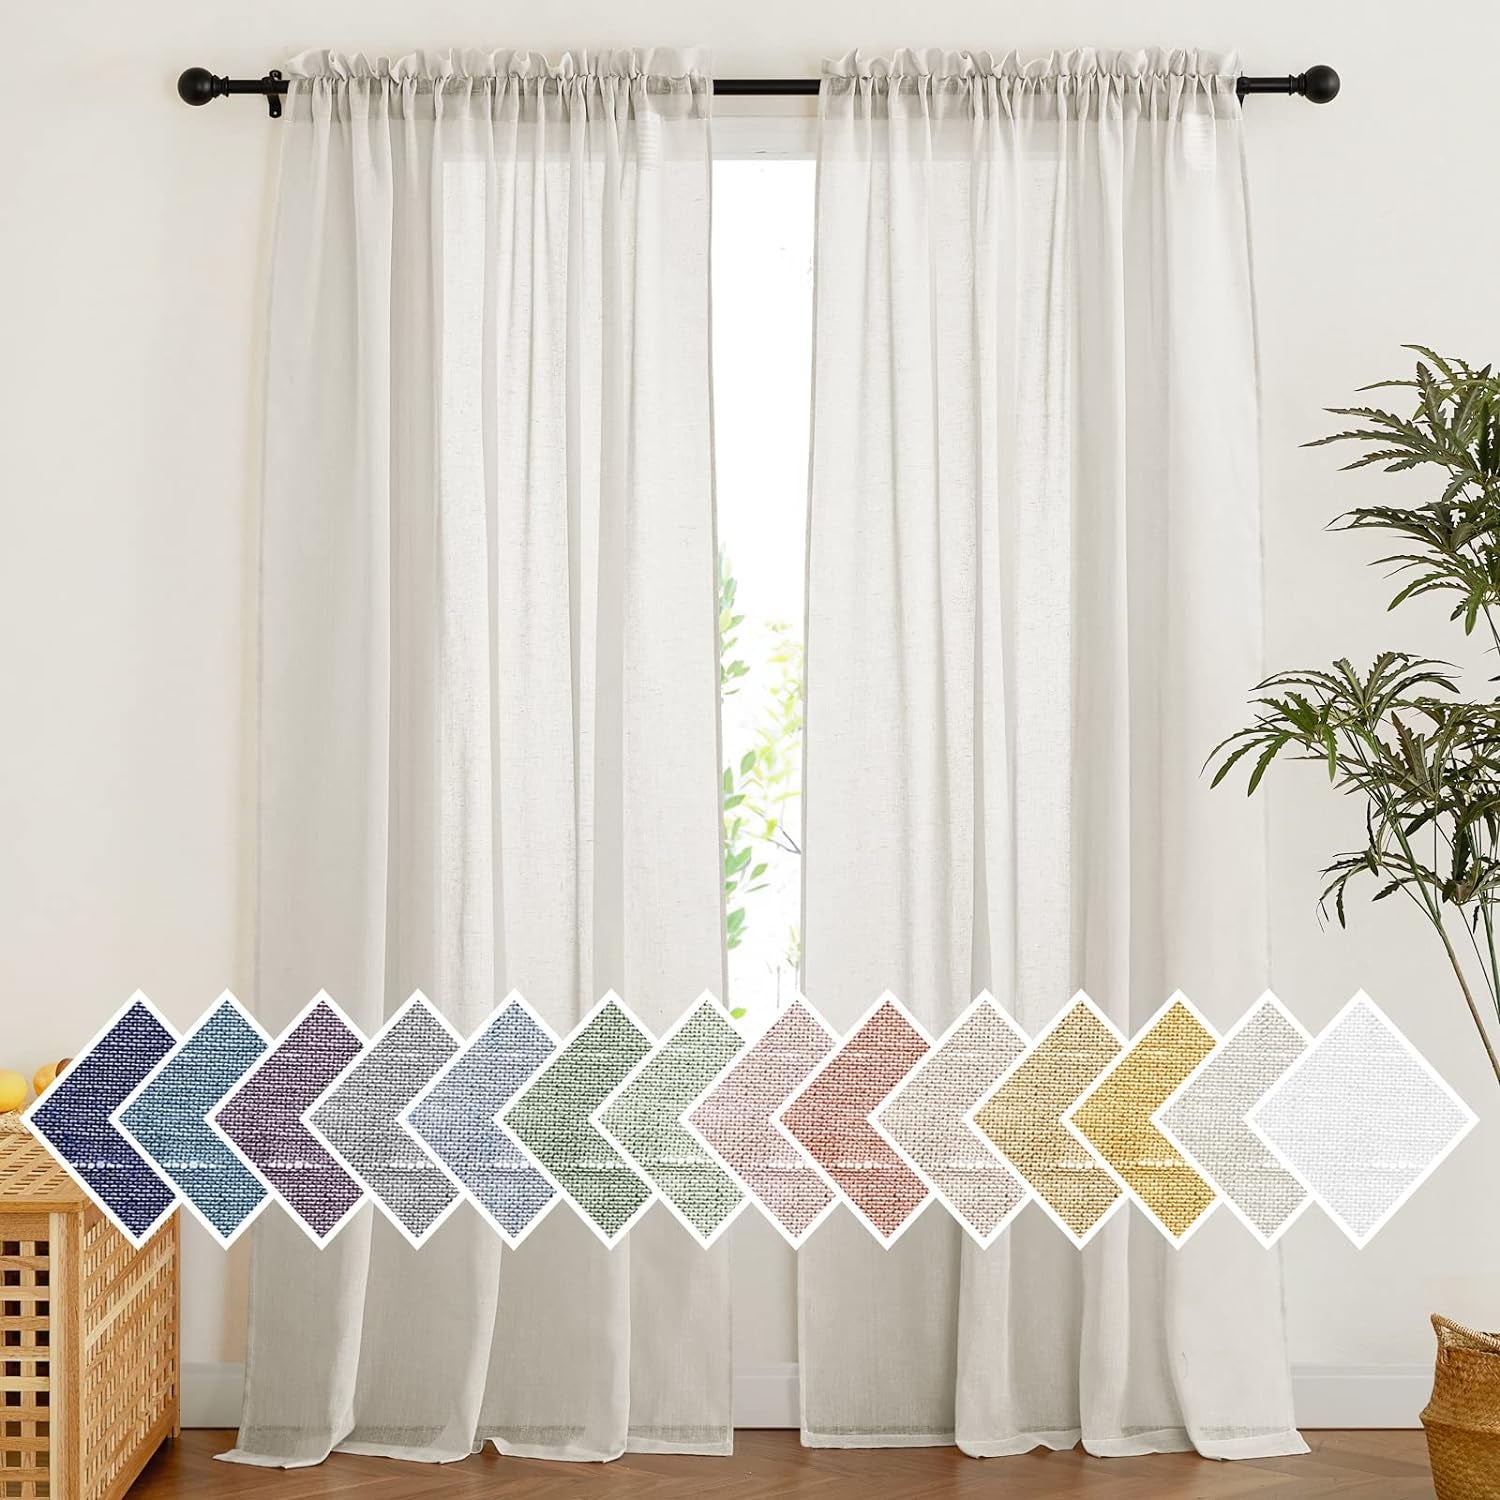 NICETOWN Semi Sheer White Curtains 84 Inch Long, Rod Pocket Sheer Linen Curtains & Drapes Balance Privacy & Light Panels for Bedroom/Living Room, W52 X L84, 2 Panels  NICETOWN Natural W52 X L84 